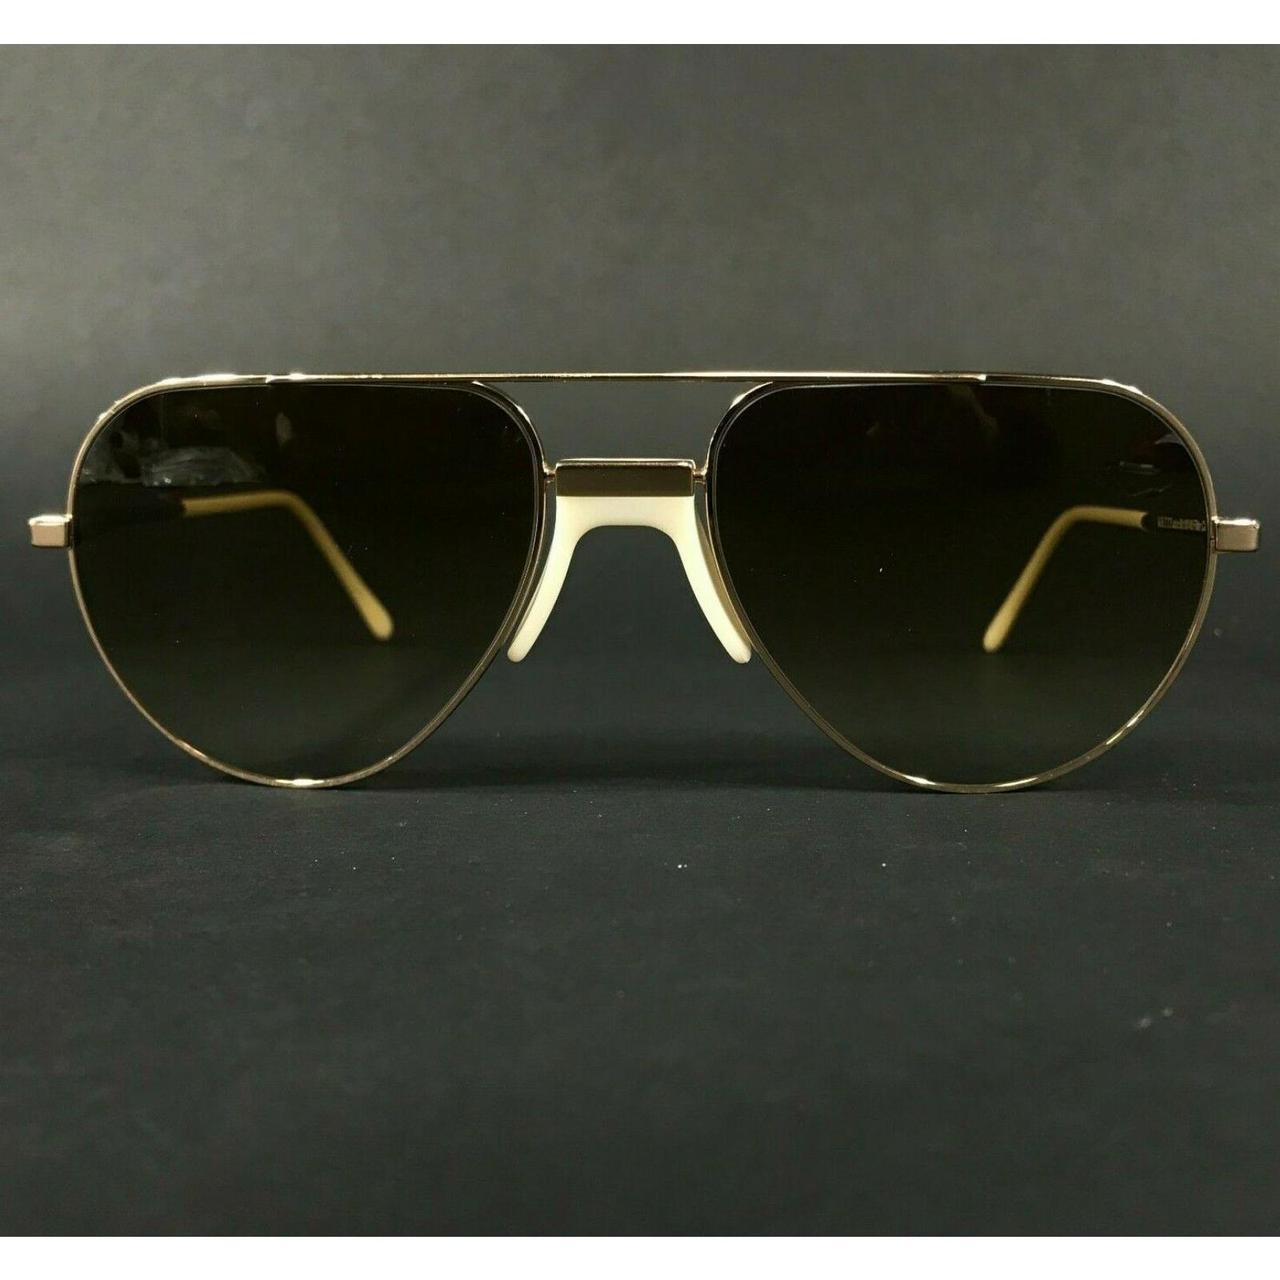 Andy Wolf Men's White and Brown Sunglasses